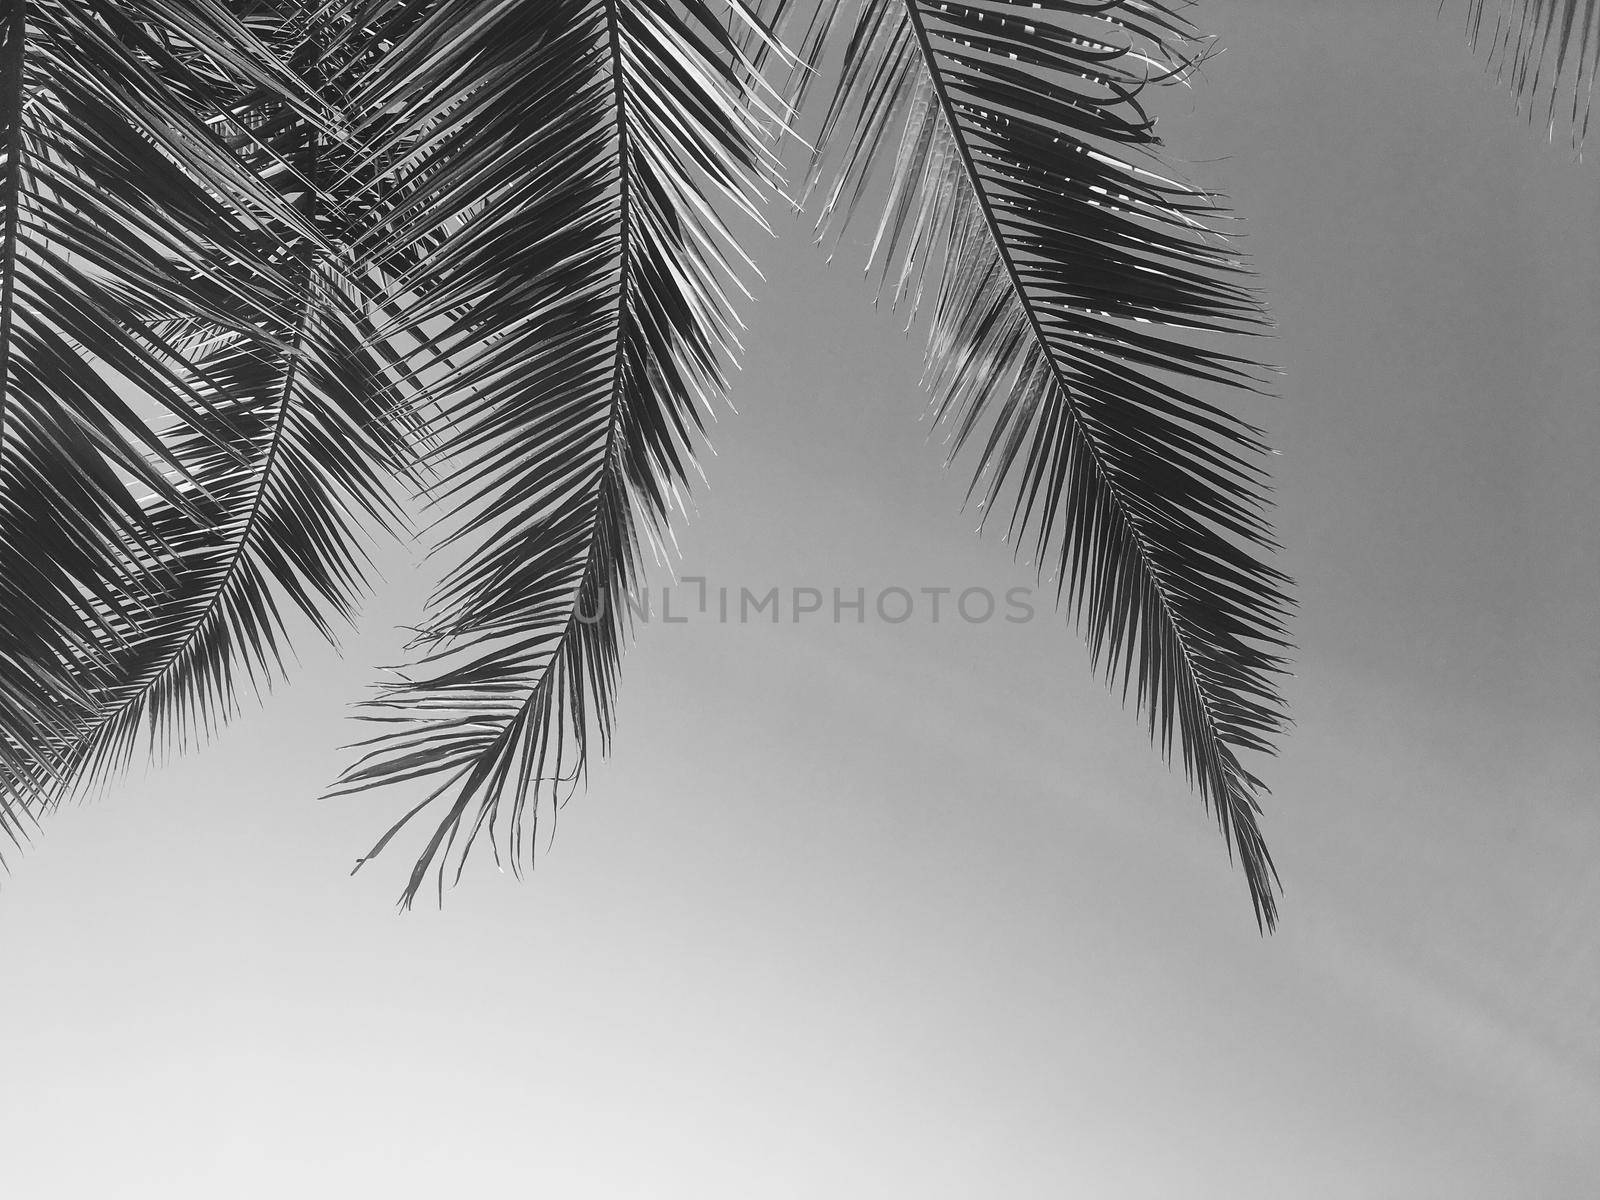 Tropical nature, vintage backdrop and summer vacation concept - Palm tree leaves and the sky, summertime travel background